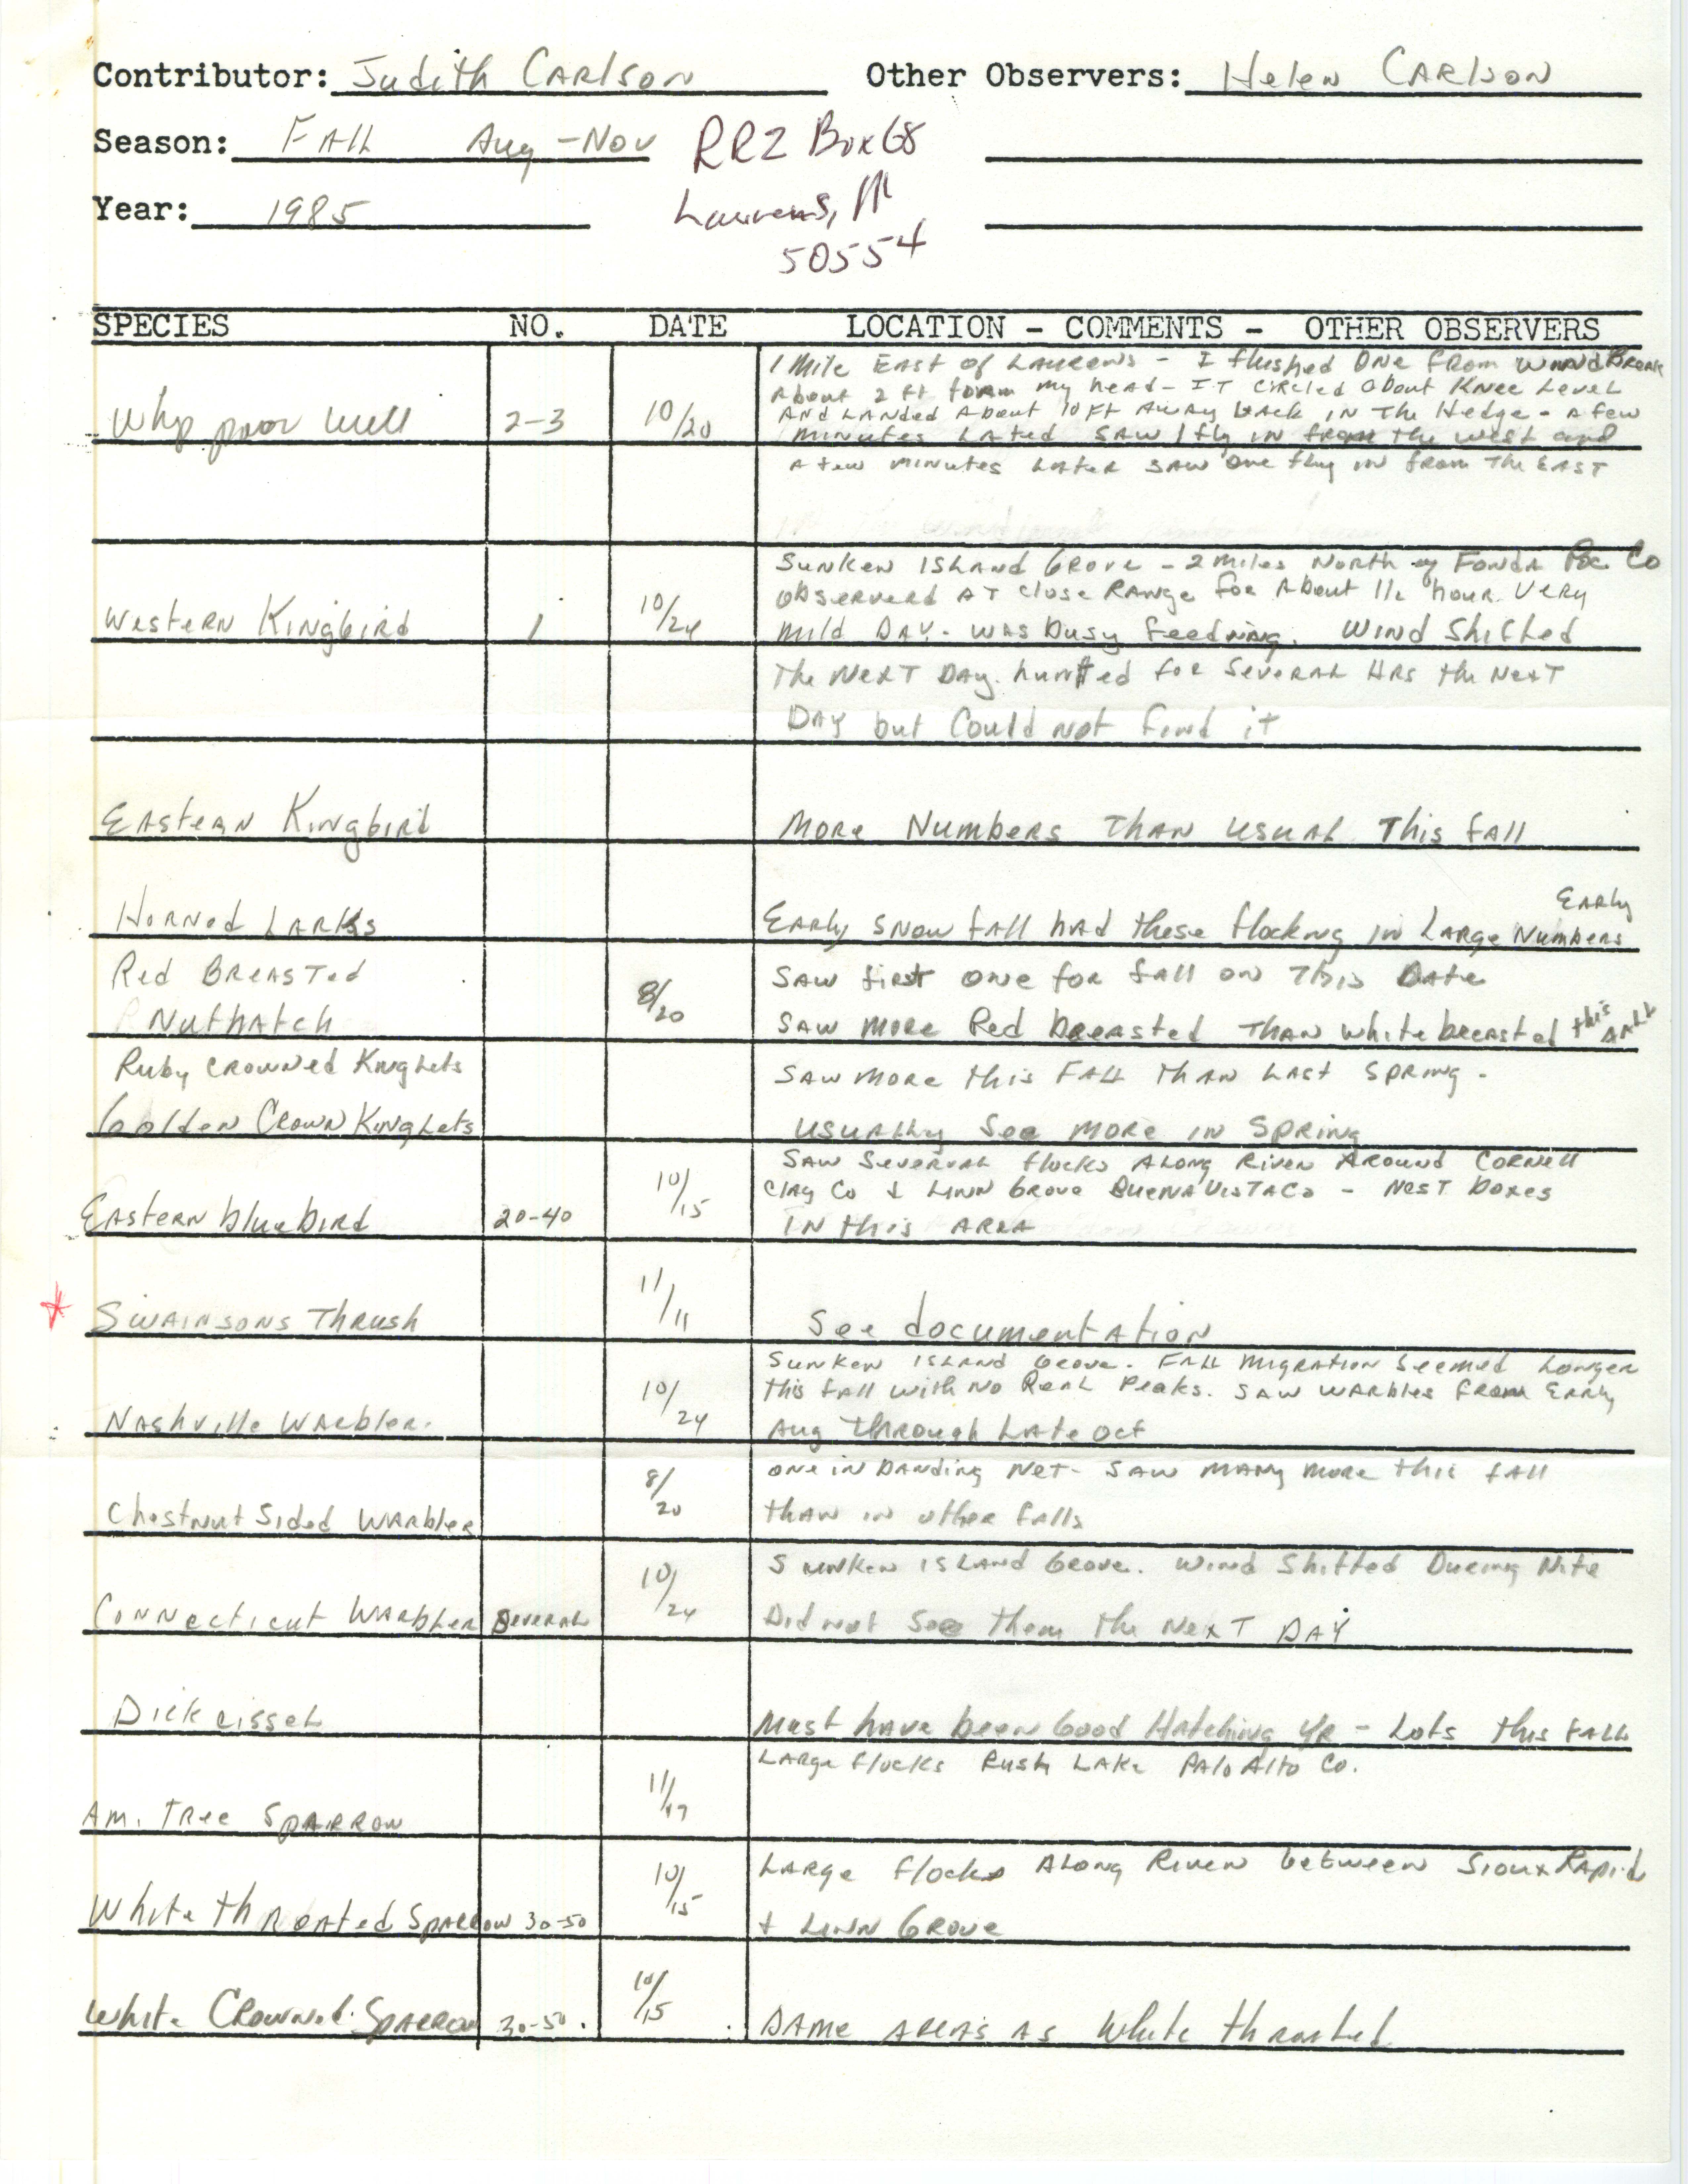 Annotated bird sighting list for Fall 1985 compiled by Judith Carlson